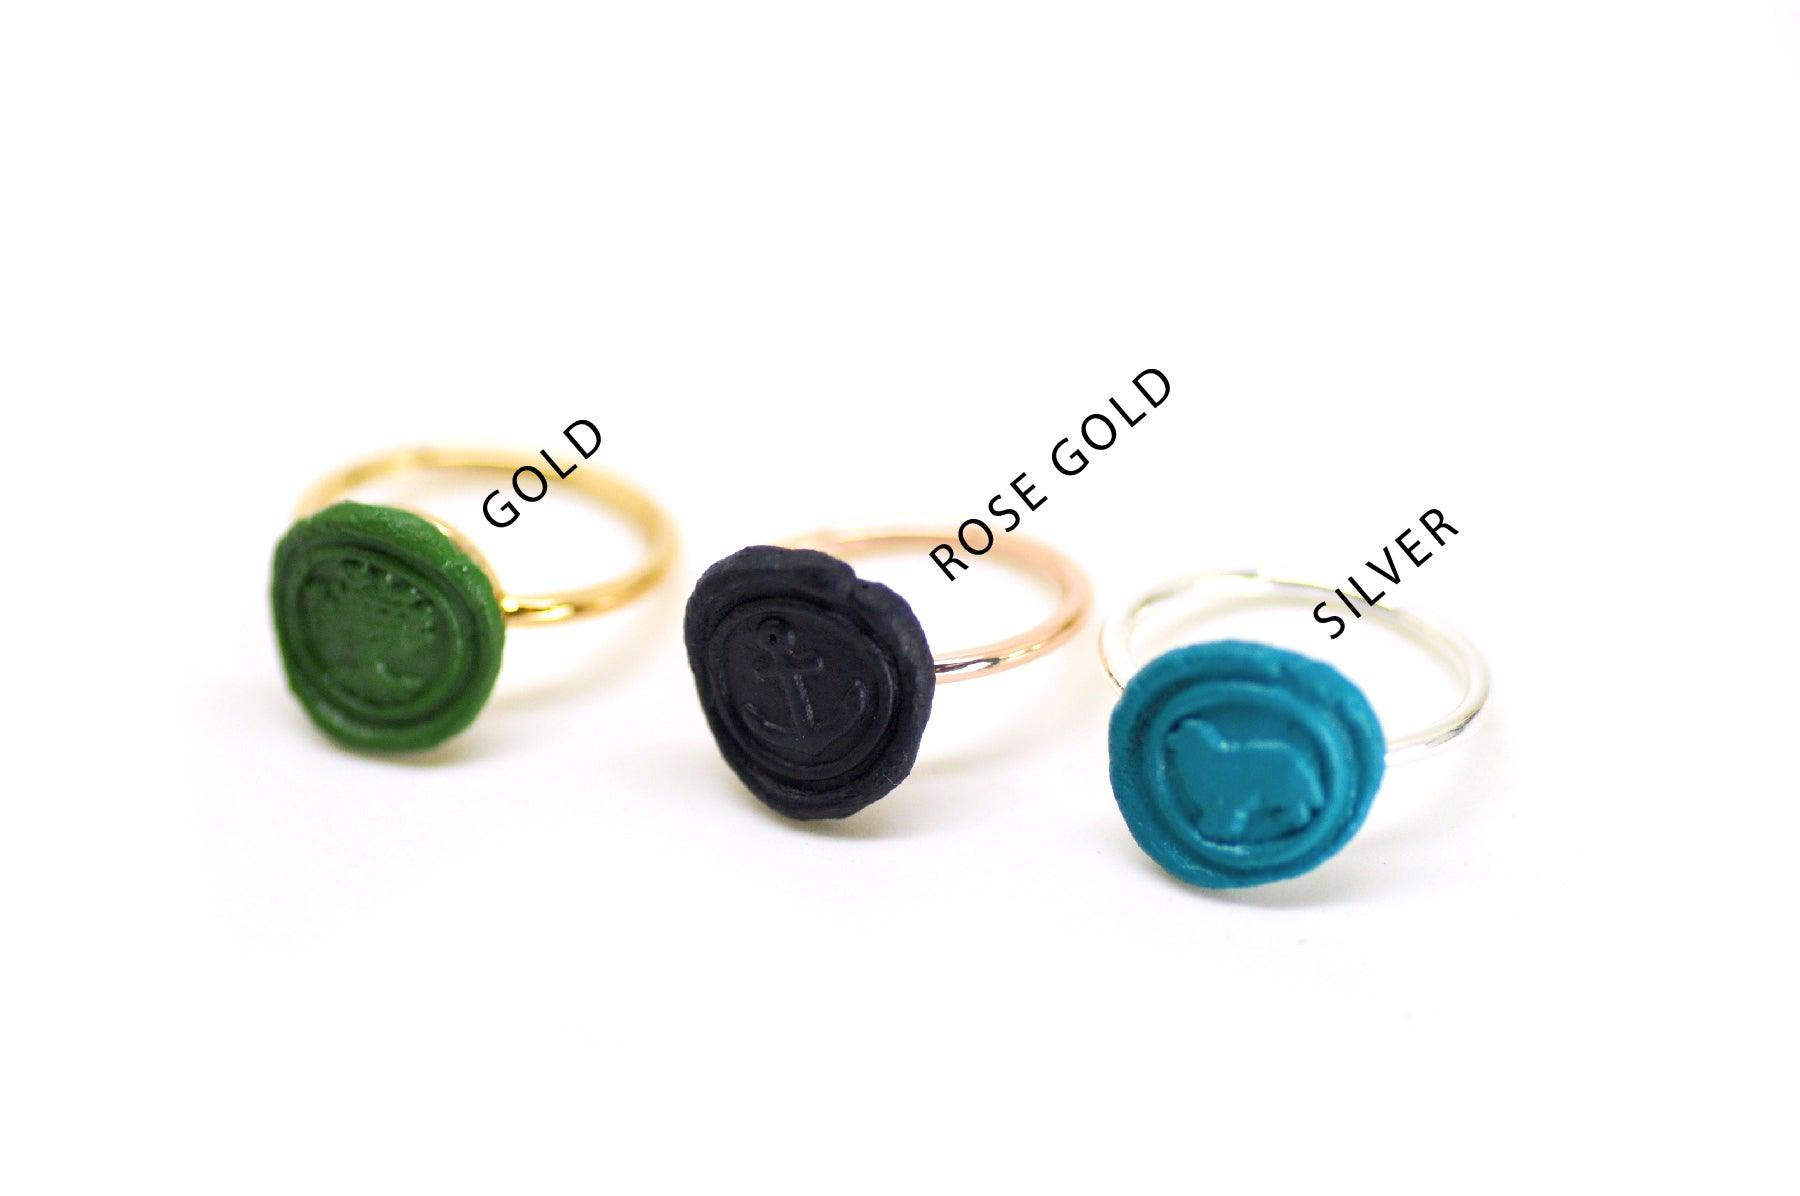 OOAK Script Initial Wax Seal Ring - Backtozero B20 - 1 initial, 1initial, Green, Handmade, Initial, Letter, One Initial, OOAK, Personalized, ring, size 7